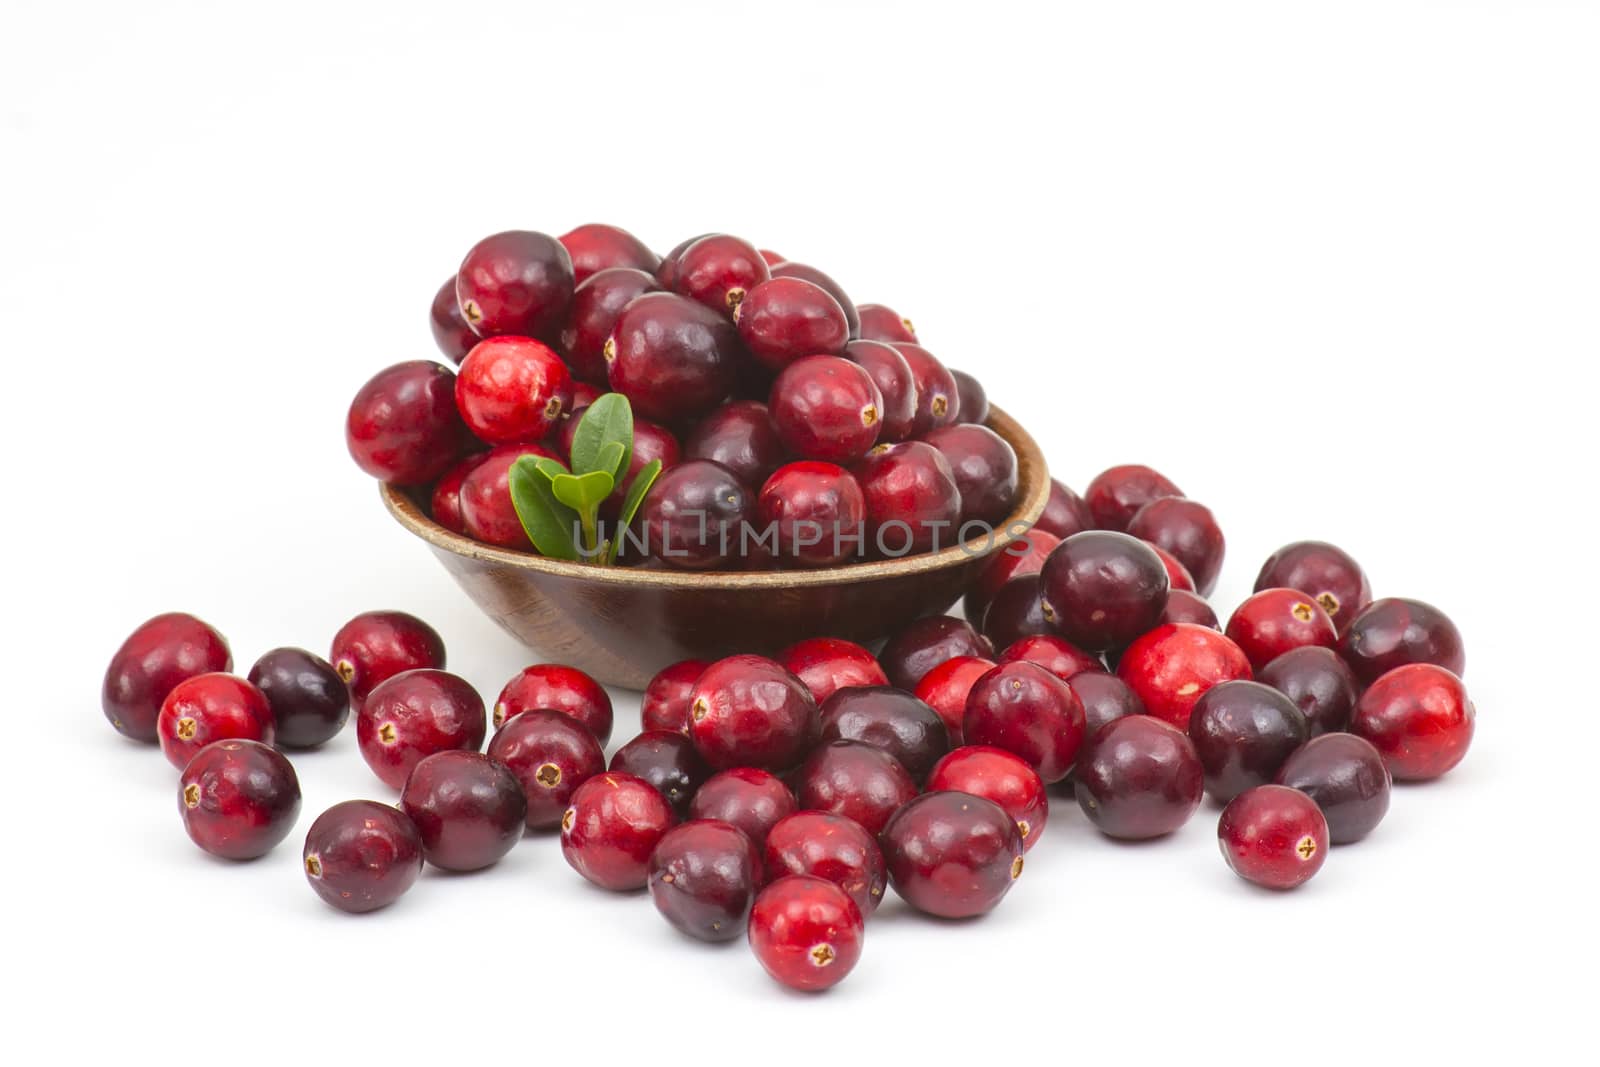 Cranberries in wooden bowl on white background.